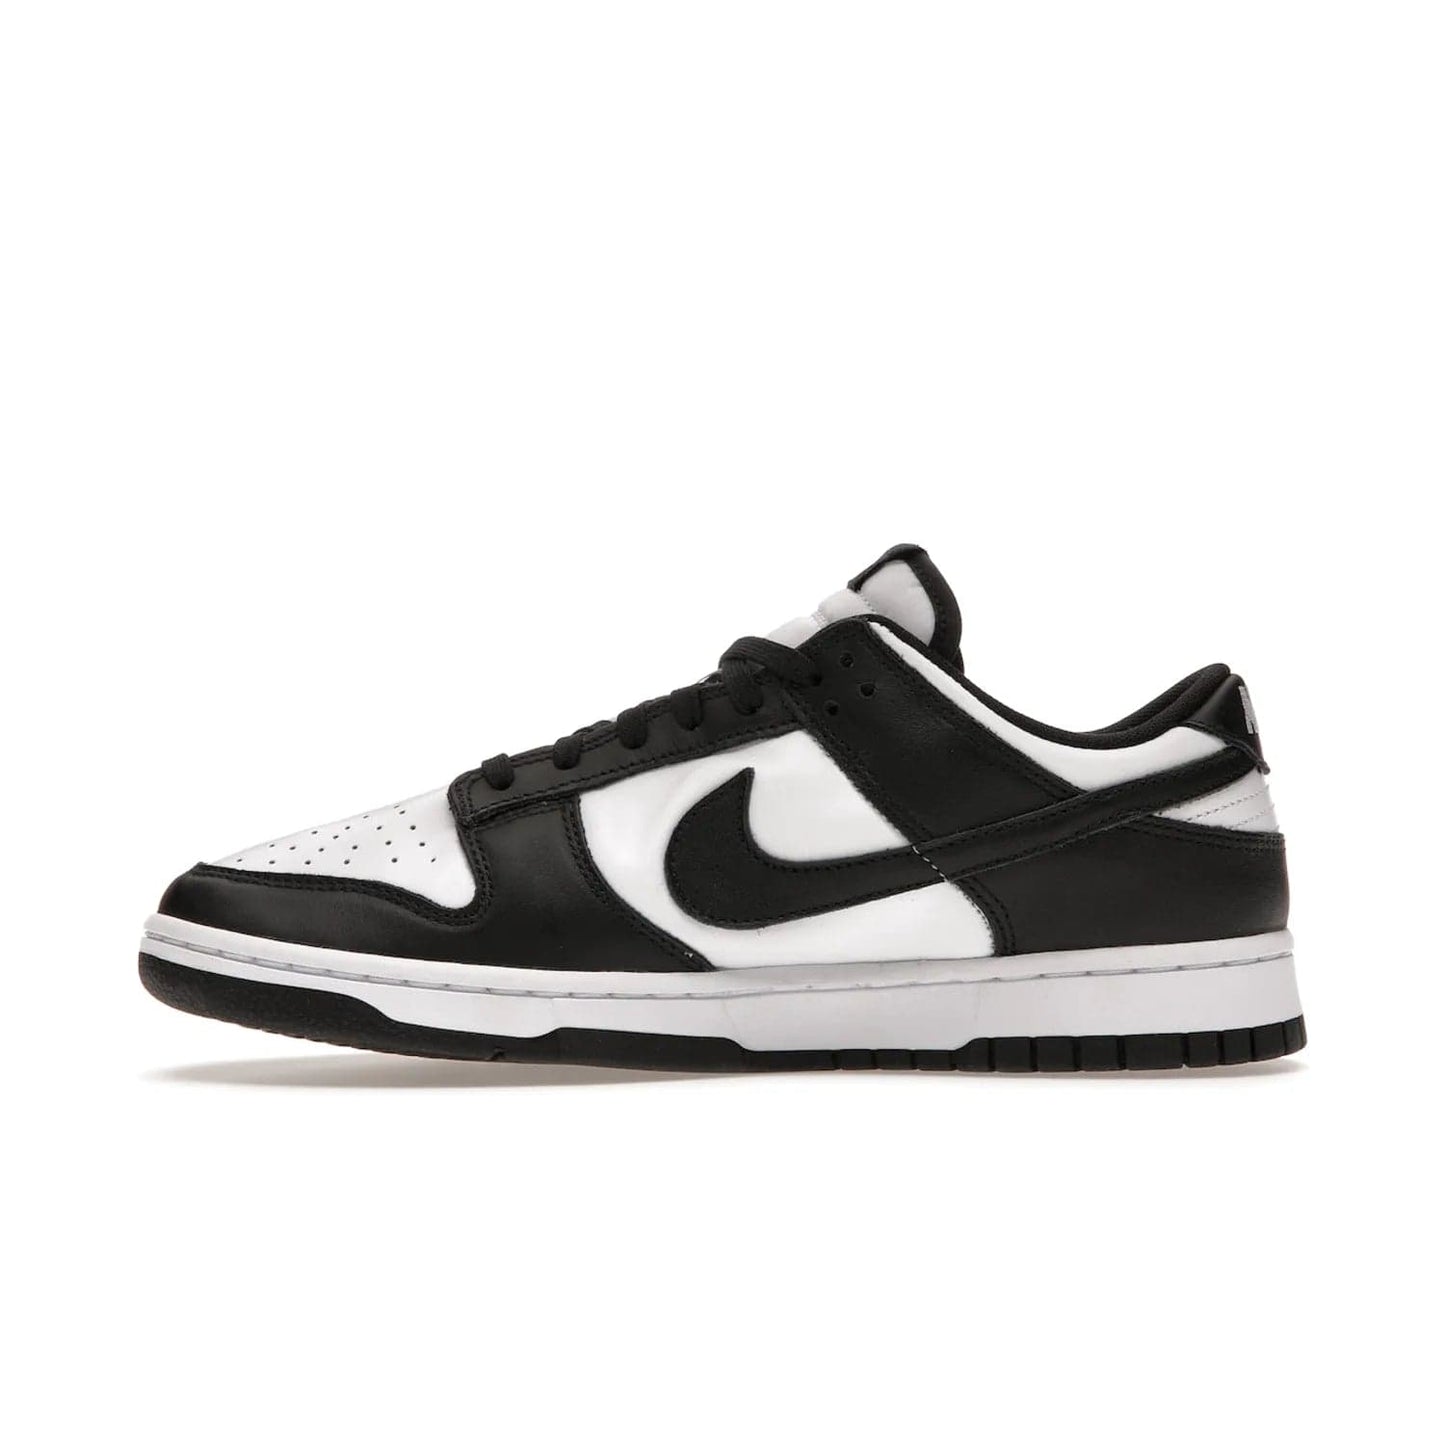 Nike Dunk Low Retro White Black Panda (2021) - Image 19 - Only at www.BallersClubKickz.com - Shop the Nike Dunk Low Retro White Black for classic styling featuring white leather with black leather overlays and classic Nike branding. Released in 2021, this timeless design offers a white midsole and black outsole for a stylish look. Shop all the Nike Dunks & rock this classic look.